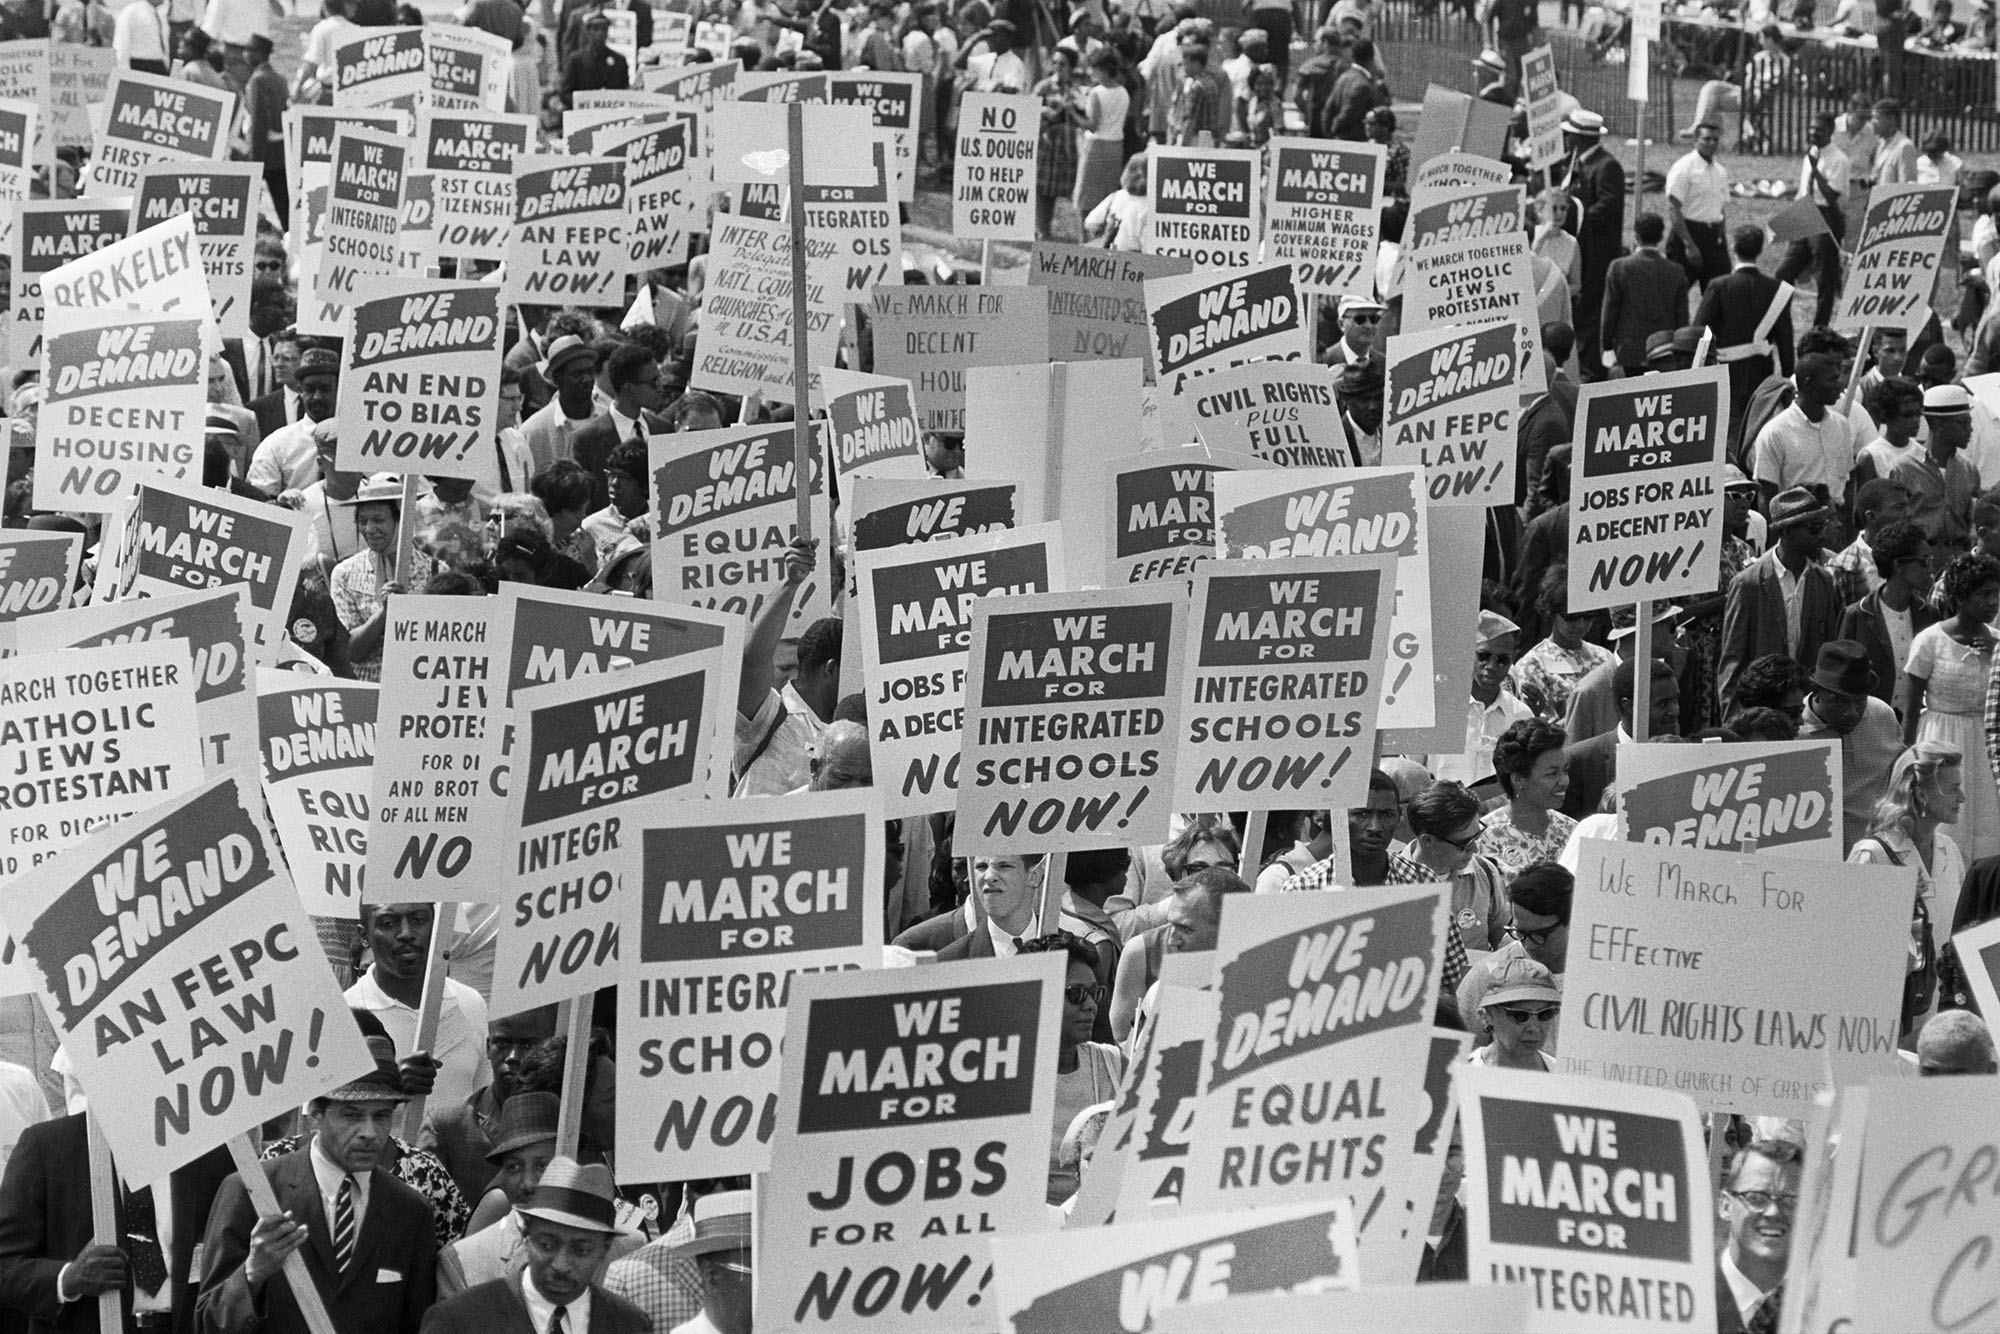 Black and White image of the 1963 March on Washington for Jobs and Freedom.  Protestors carrying various signs